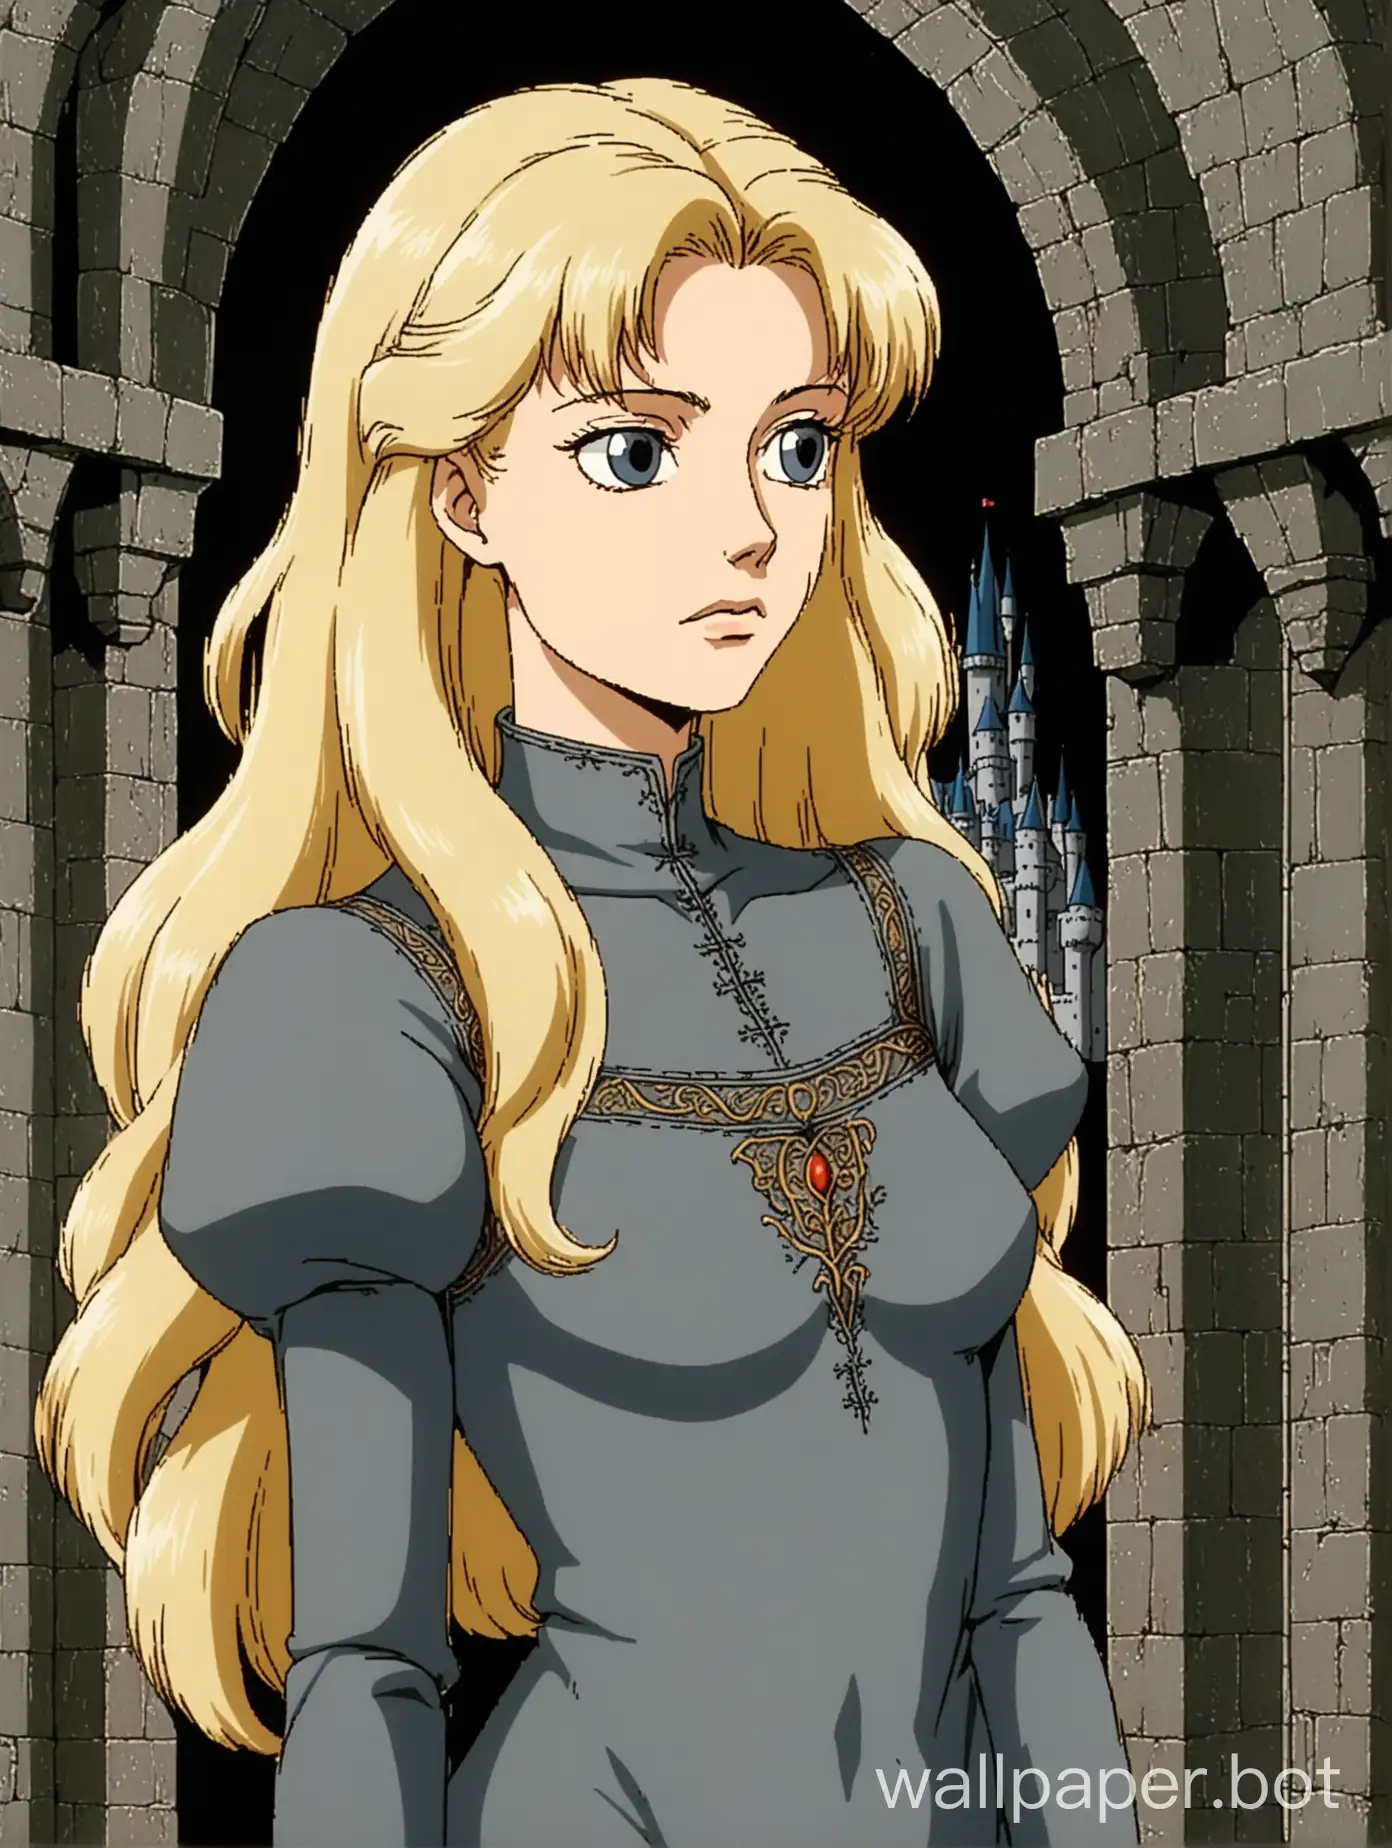 1990s retro anime, portrait of a young and attractive white woman, she has long wavy white-blonde hair, standing regally, elegant and slender, thin sharp face, kind and sullen expression, wearing a sheer thin dark grey skintight medieval dress, decorative stitching, medieval elegance, 1980s retro anime, castle interior